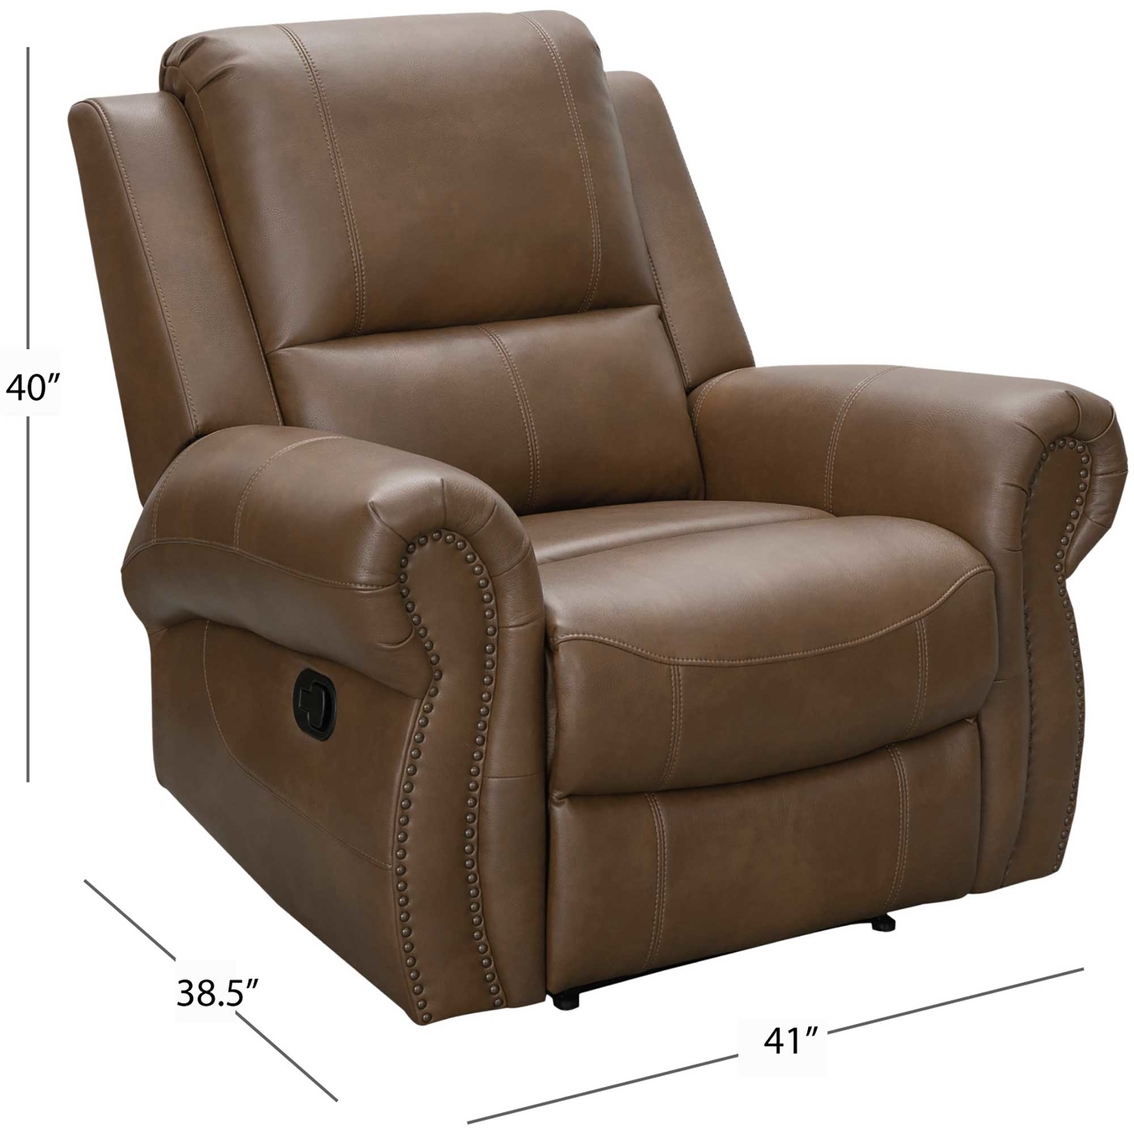 Abbyson Warren Reclining Sofa and Chair - Image 7 of 8